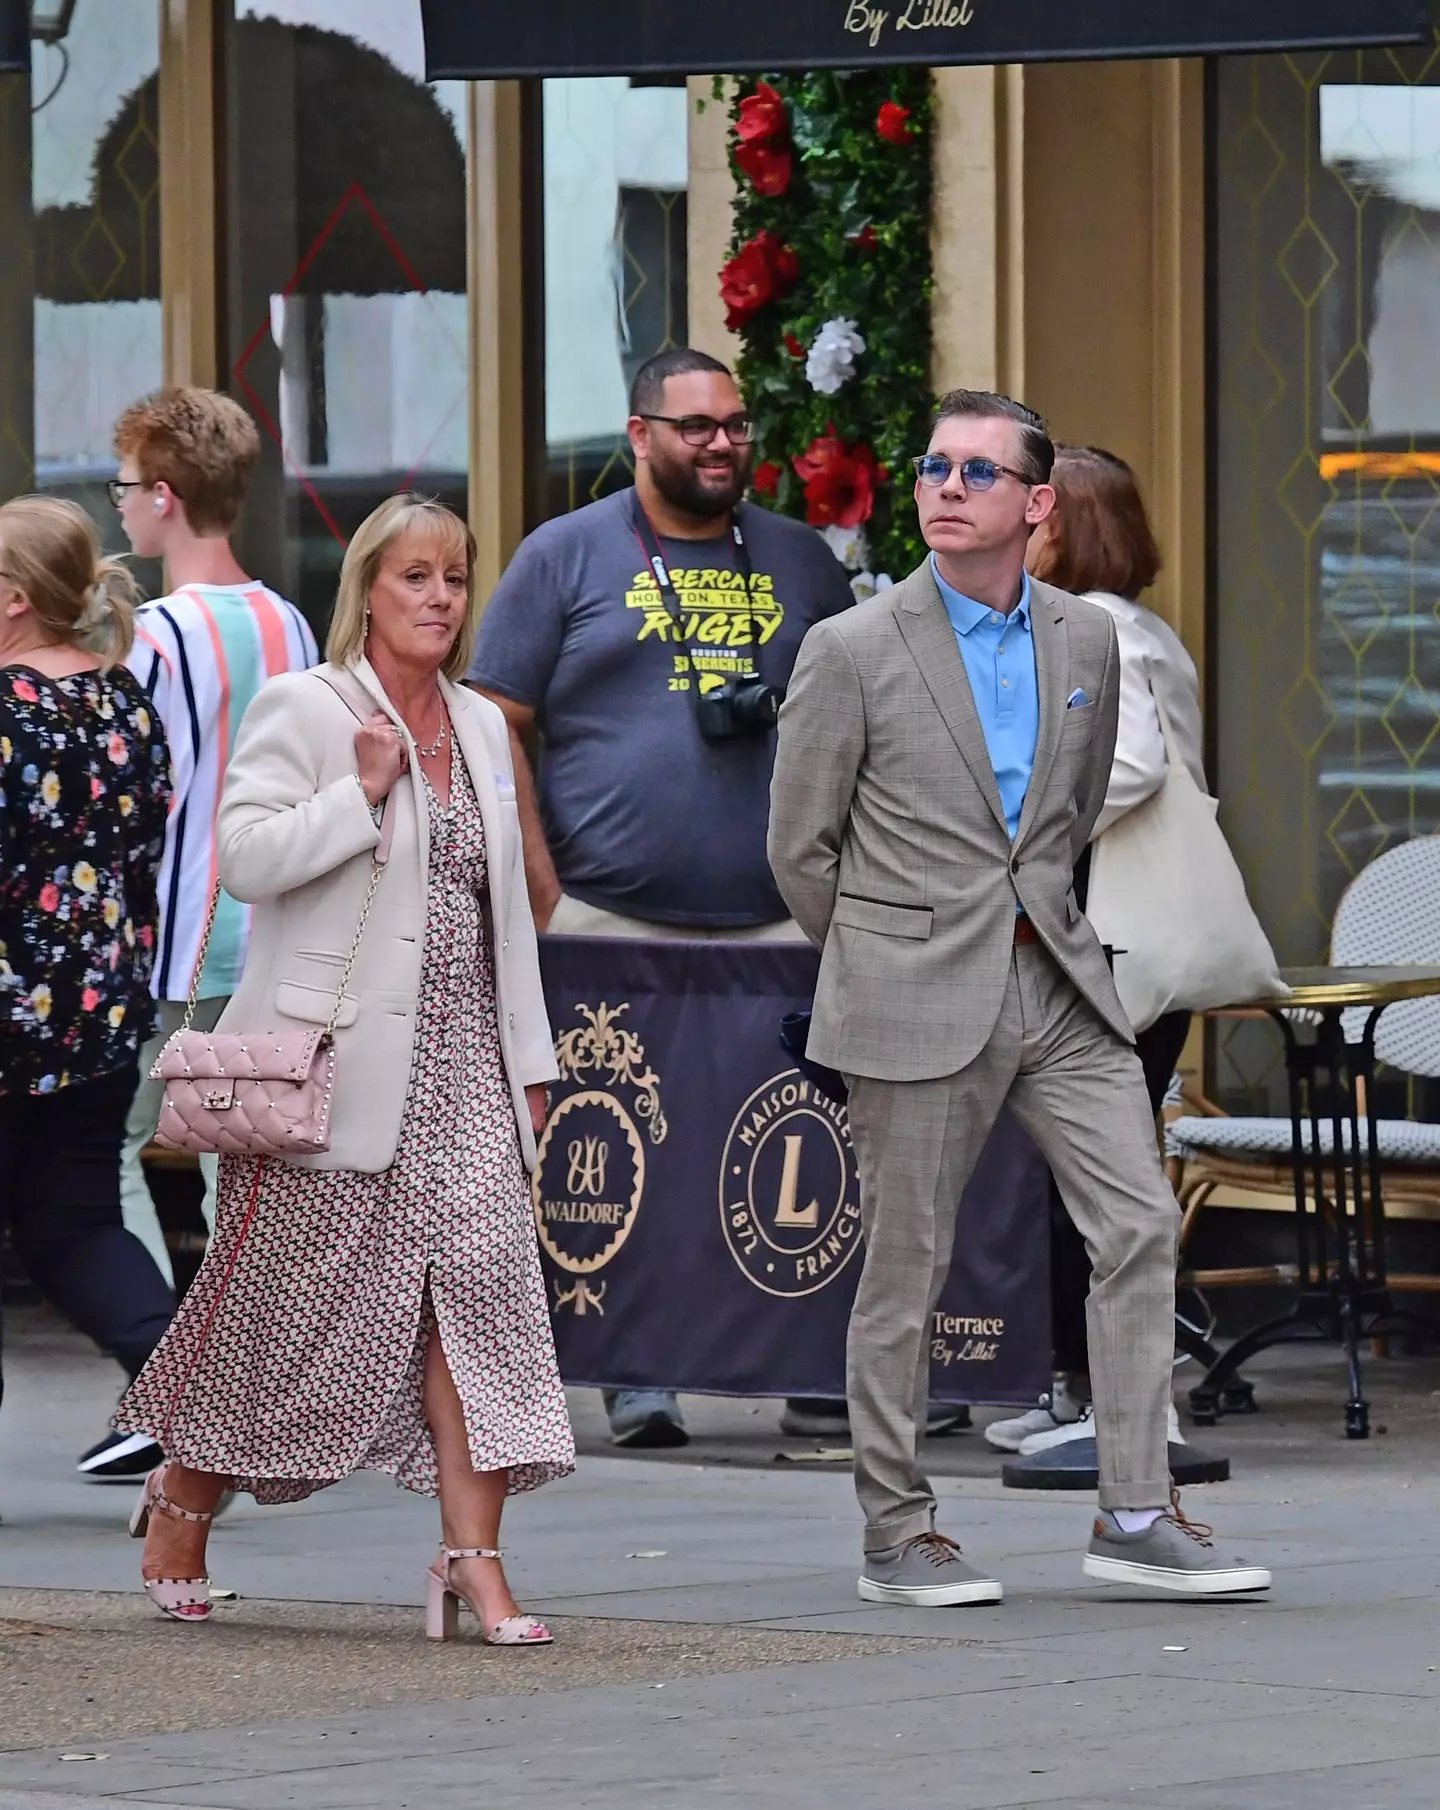 Evans appeared in London with his wife, Heather.